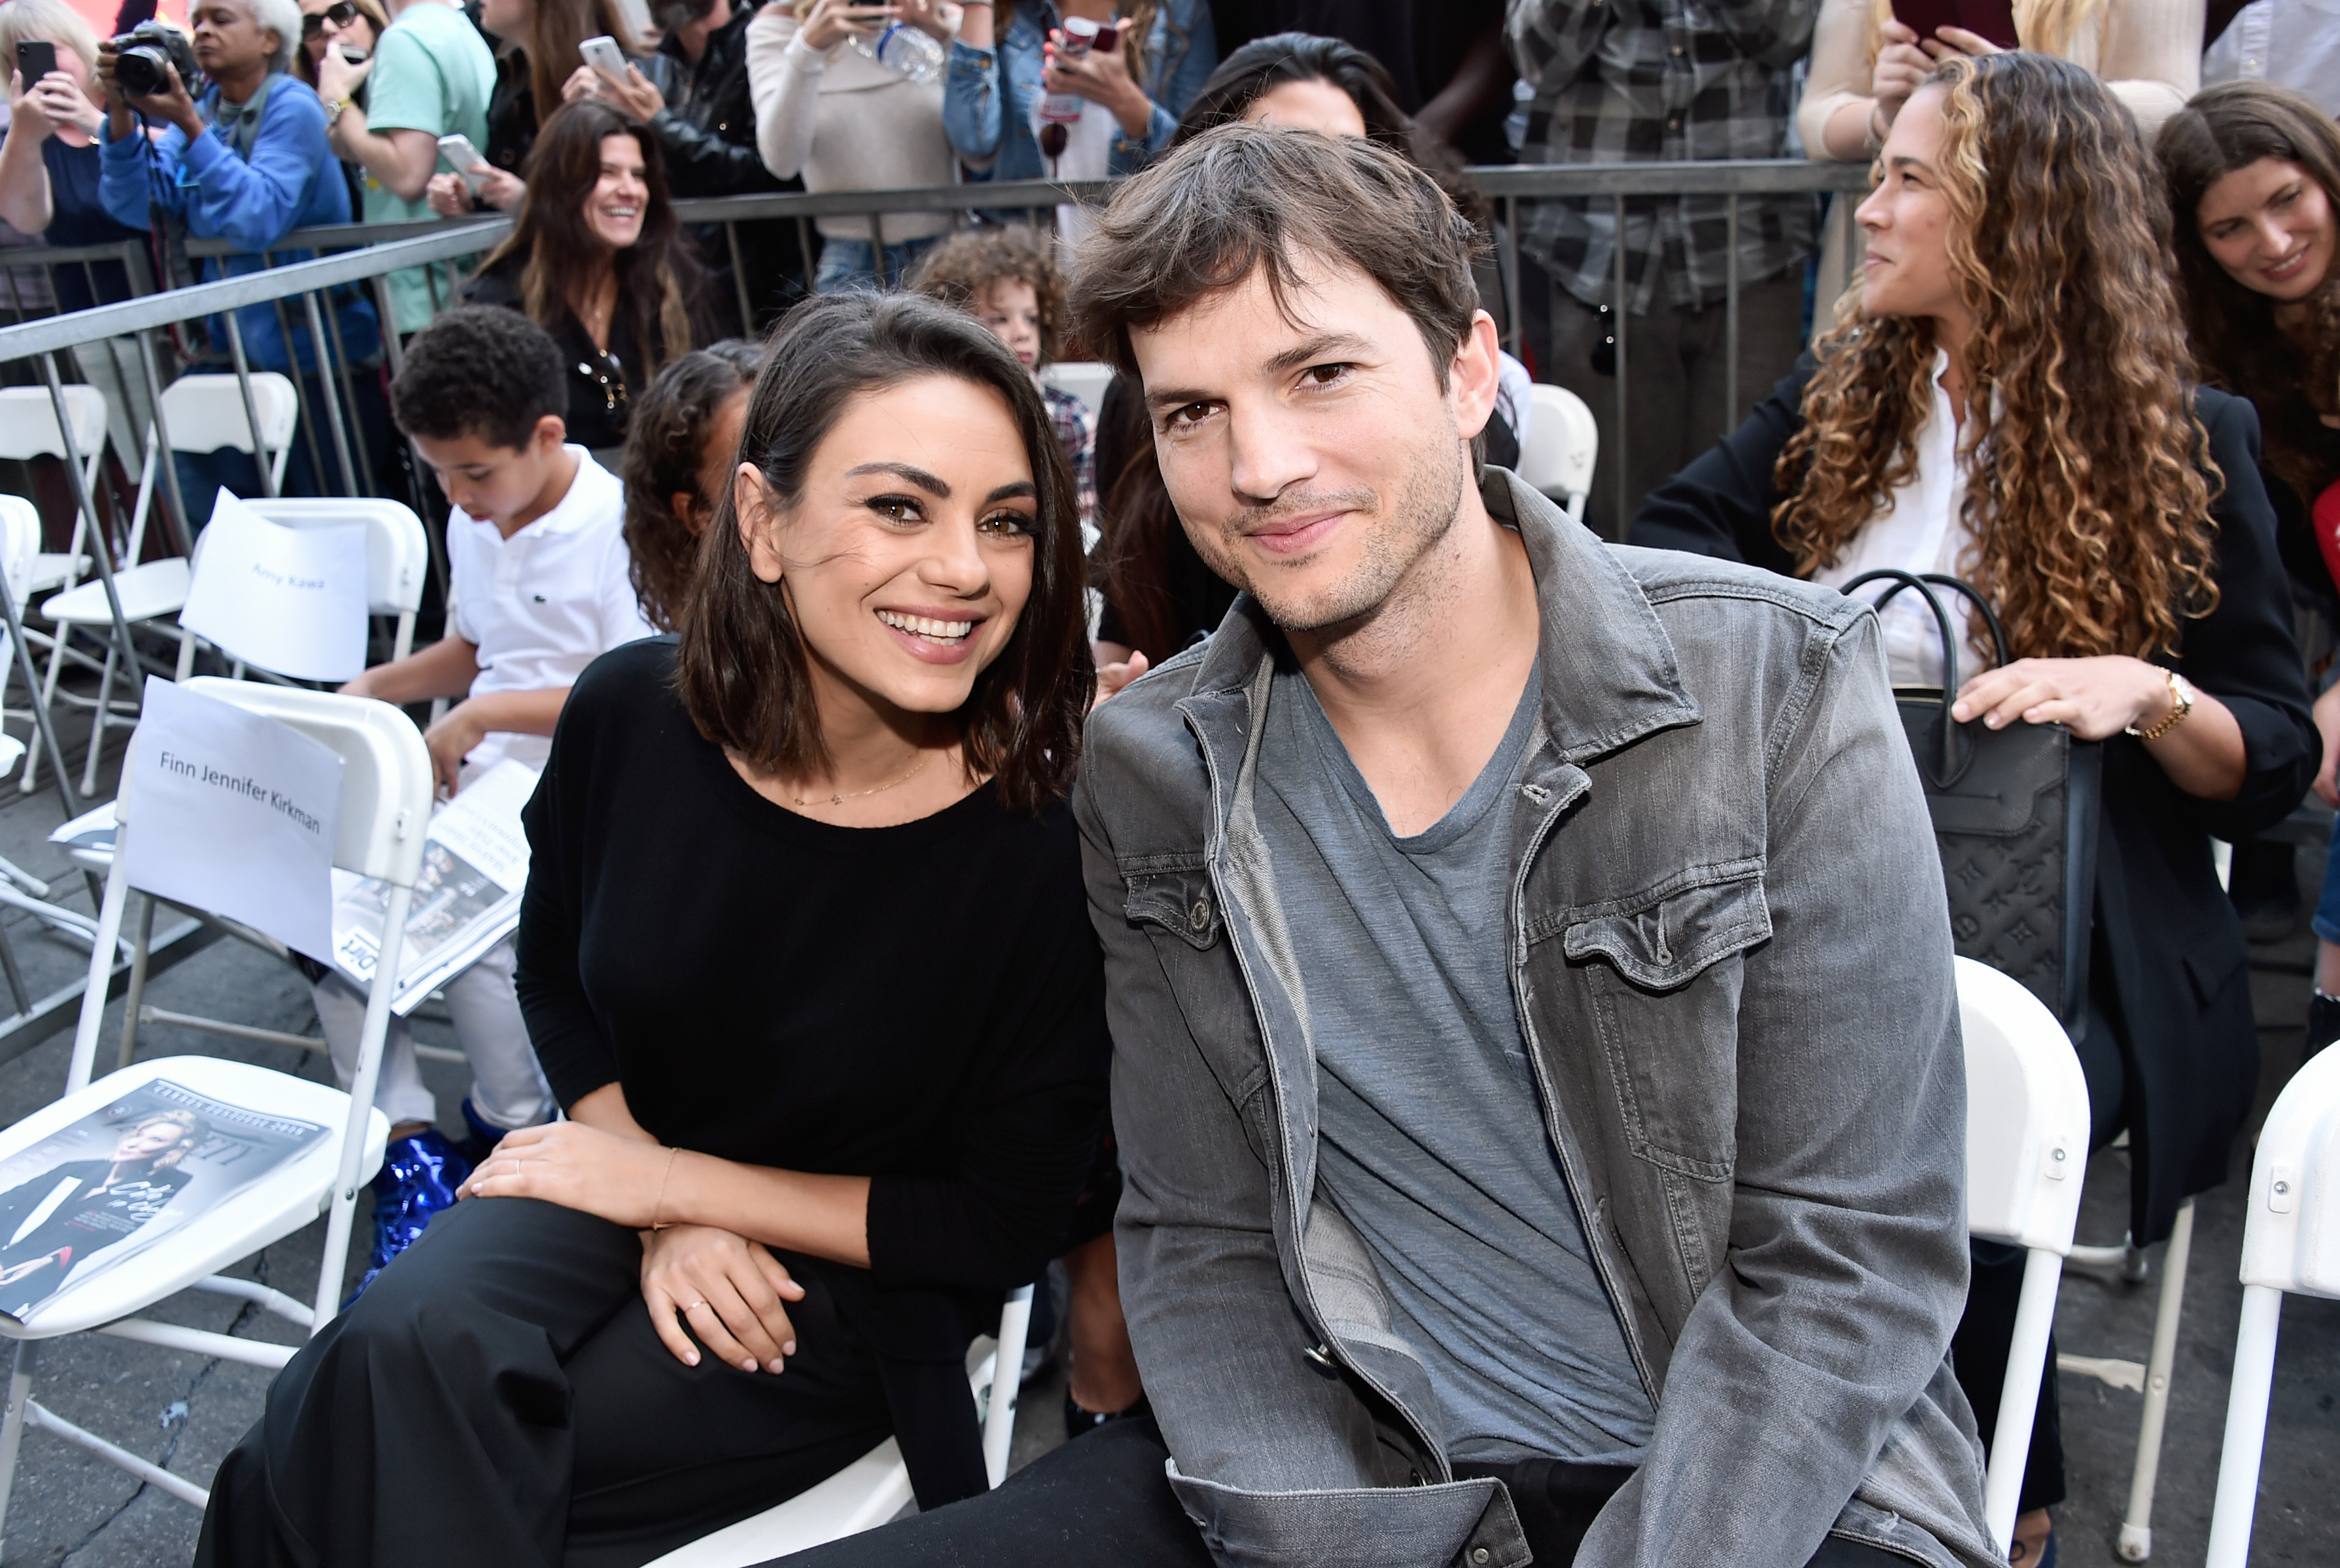 Close-up of Ashton and Mila smiling and sitting together